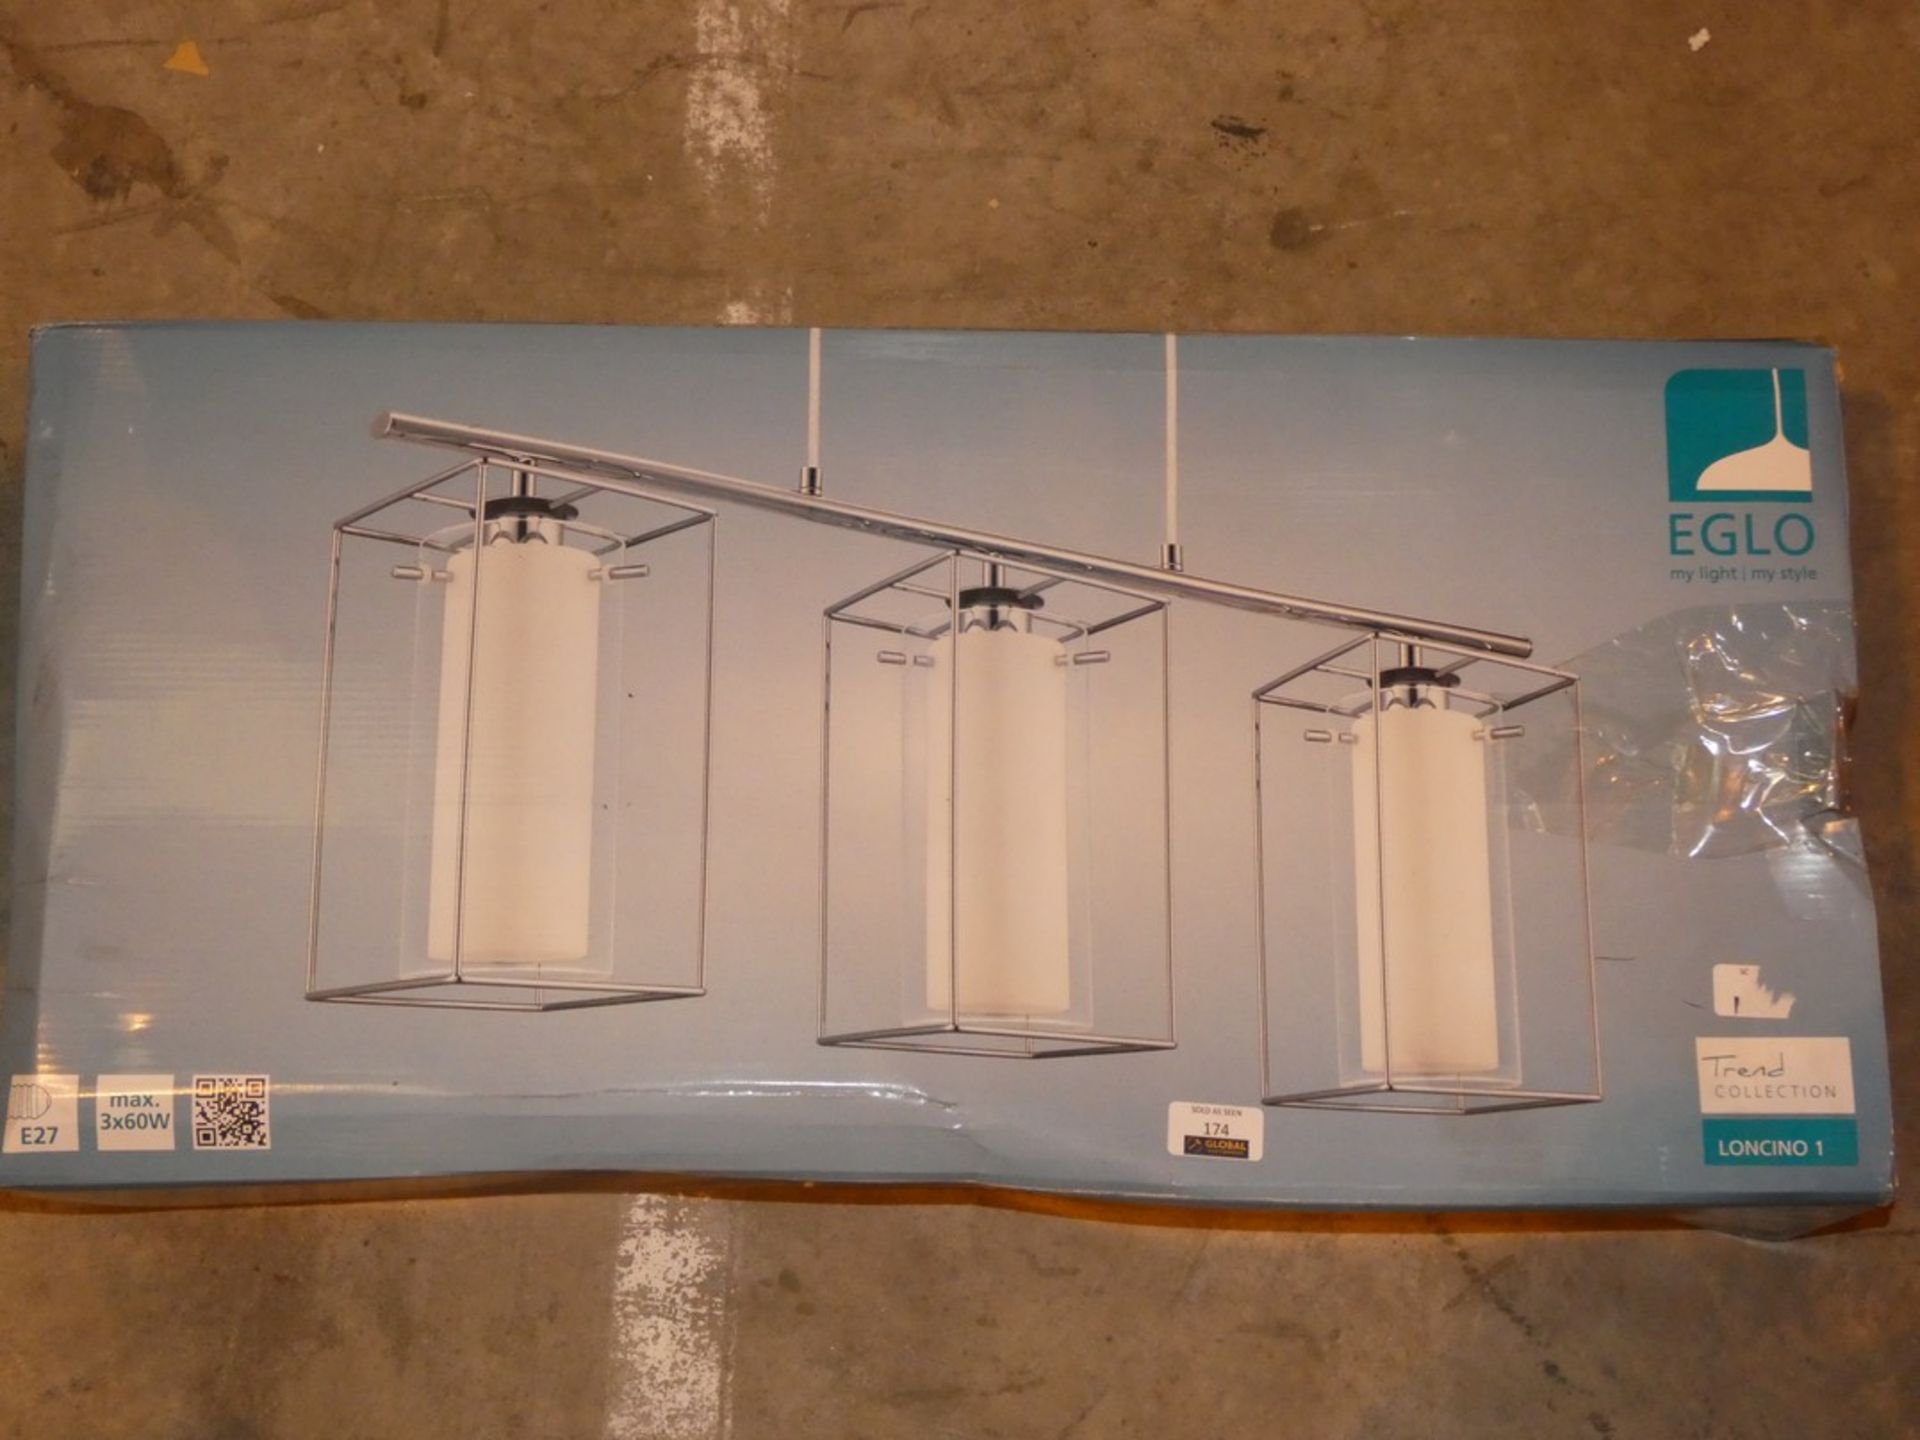 Boxed Eglo Trend Collection Moncino 1 Bar Light Fitting RRP £110 (Viewing/Appraisals Highly